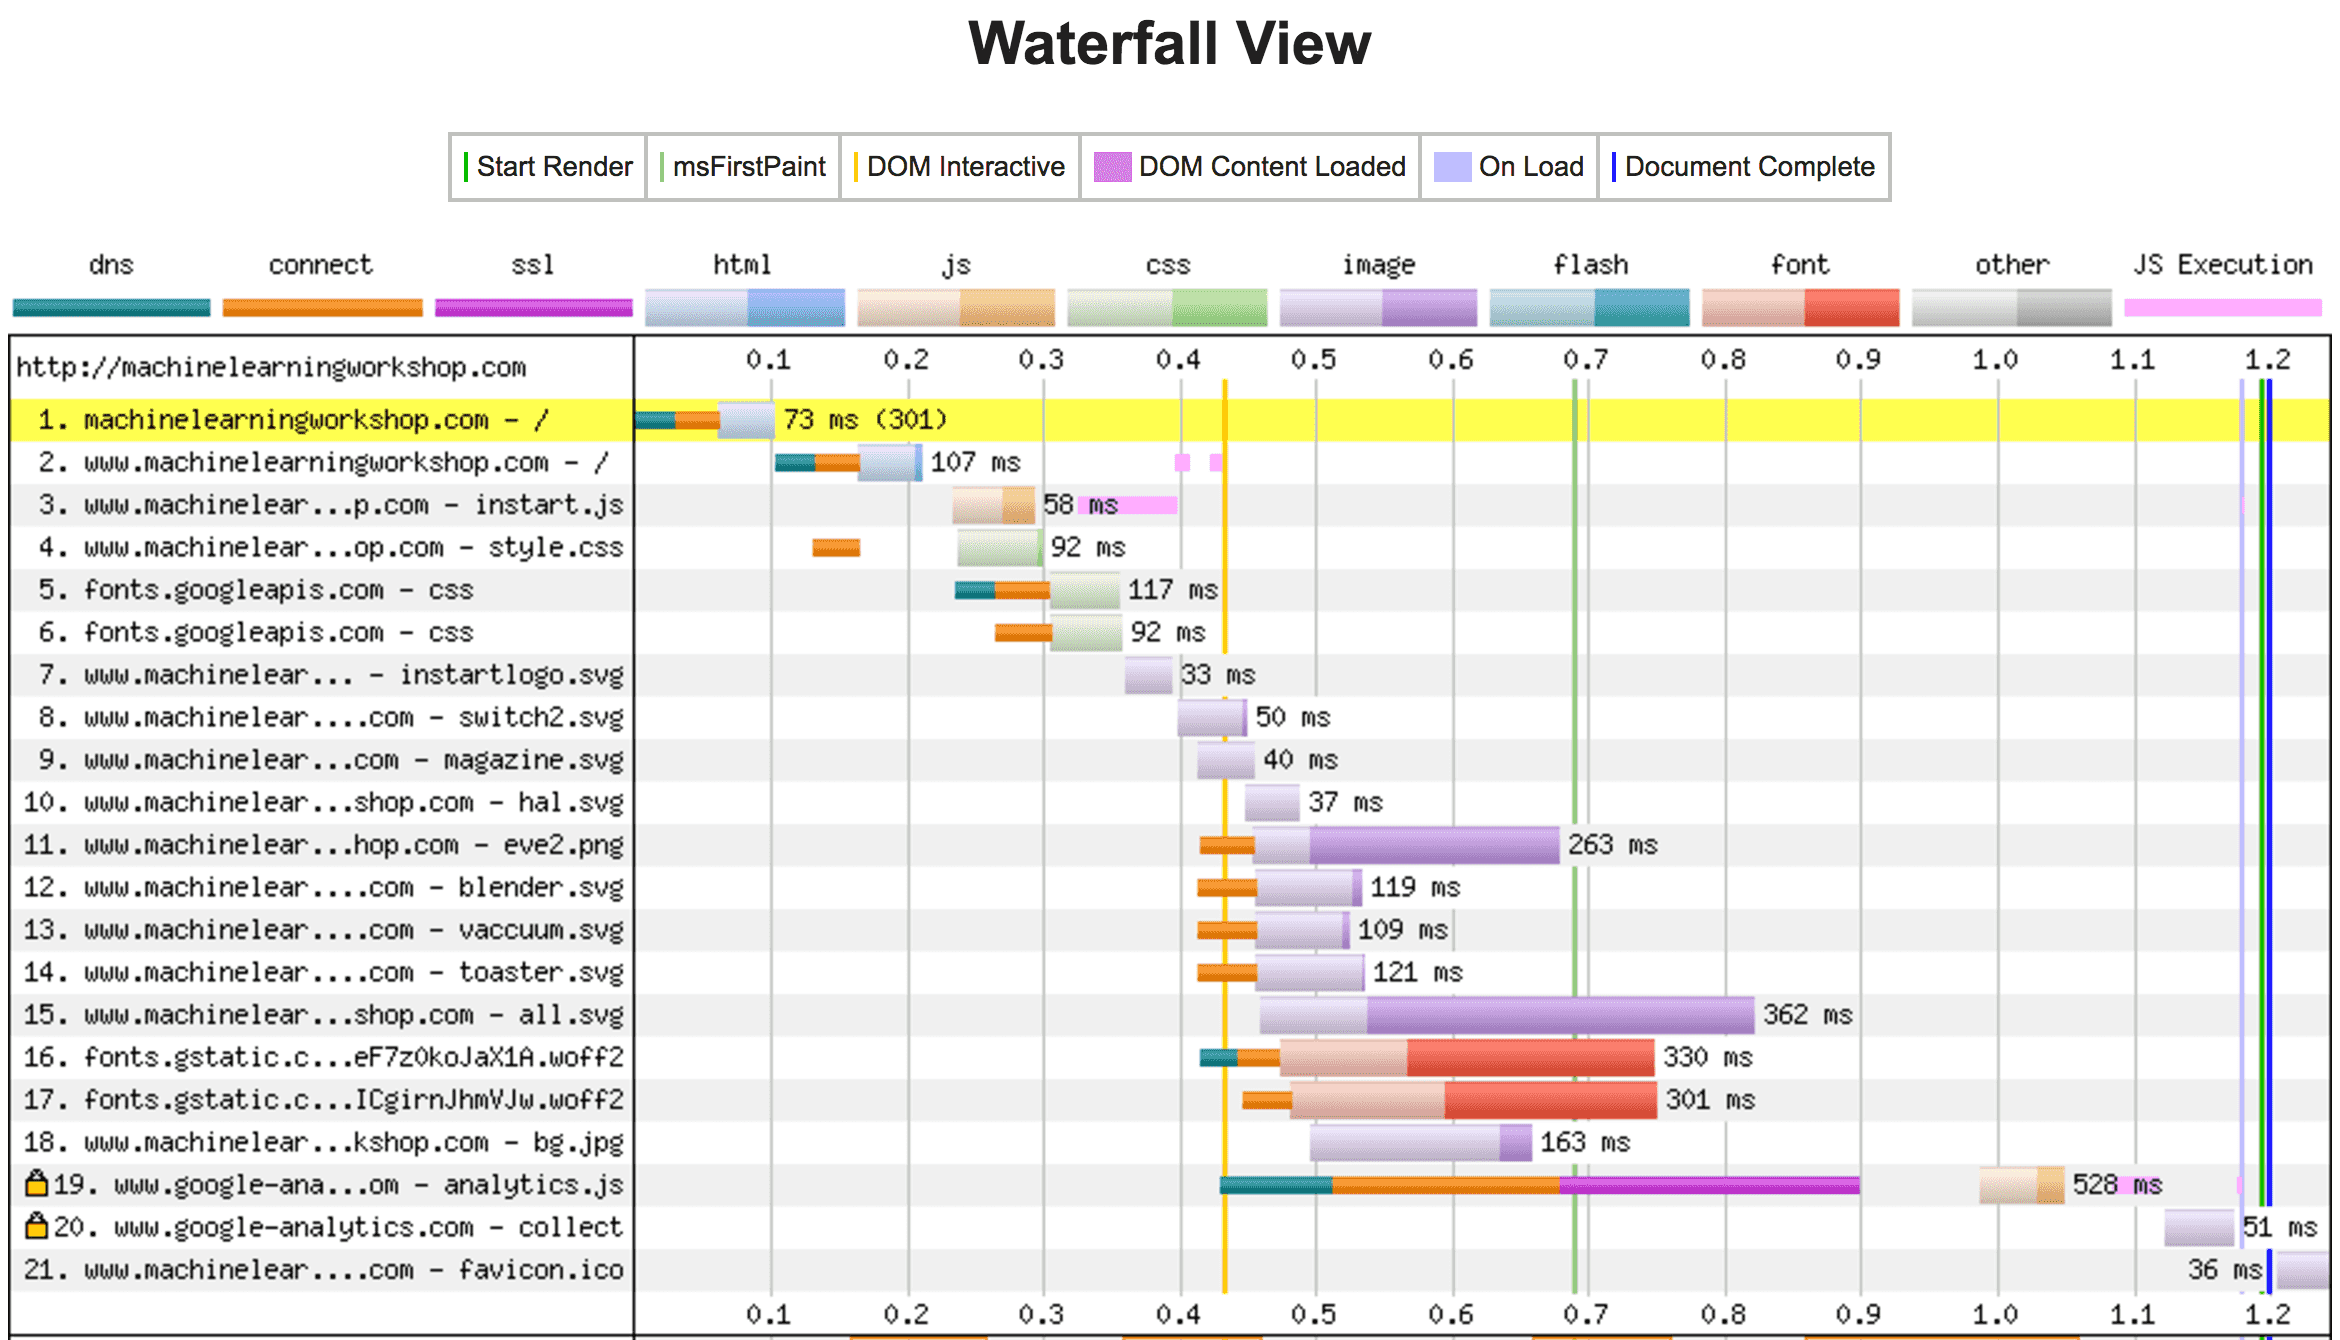 Screenshot of WebPageTest waterfall chart showing light colors in a load reflect time to first byte